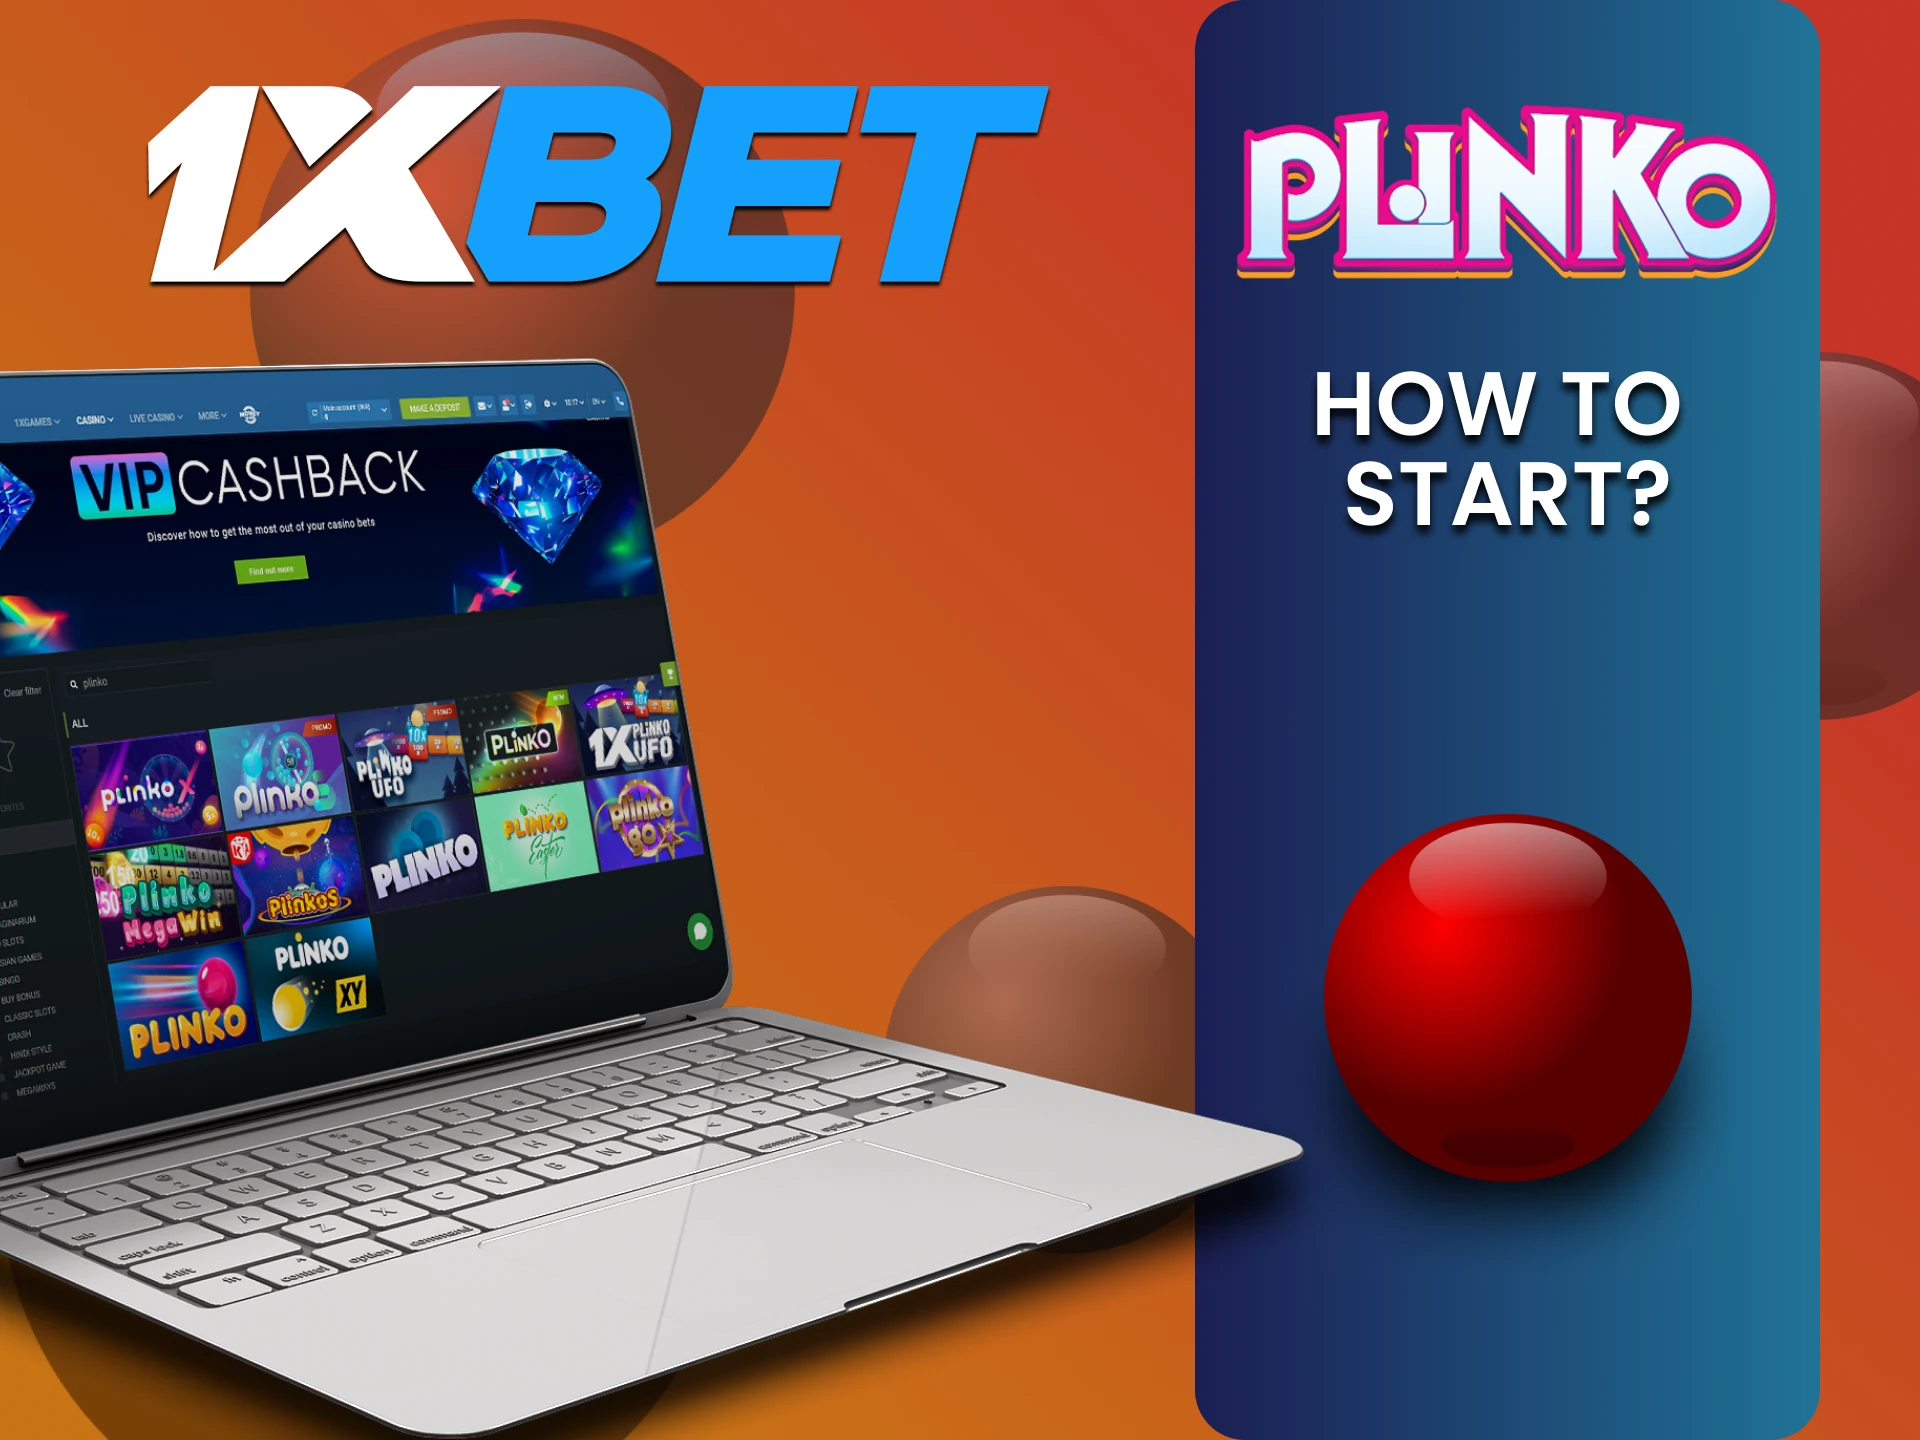 Go to the casino section to play Plinko on 1xbet.